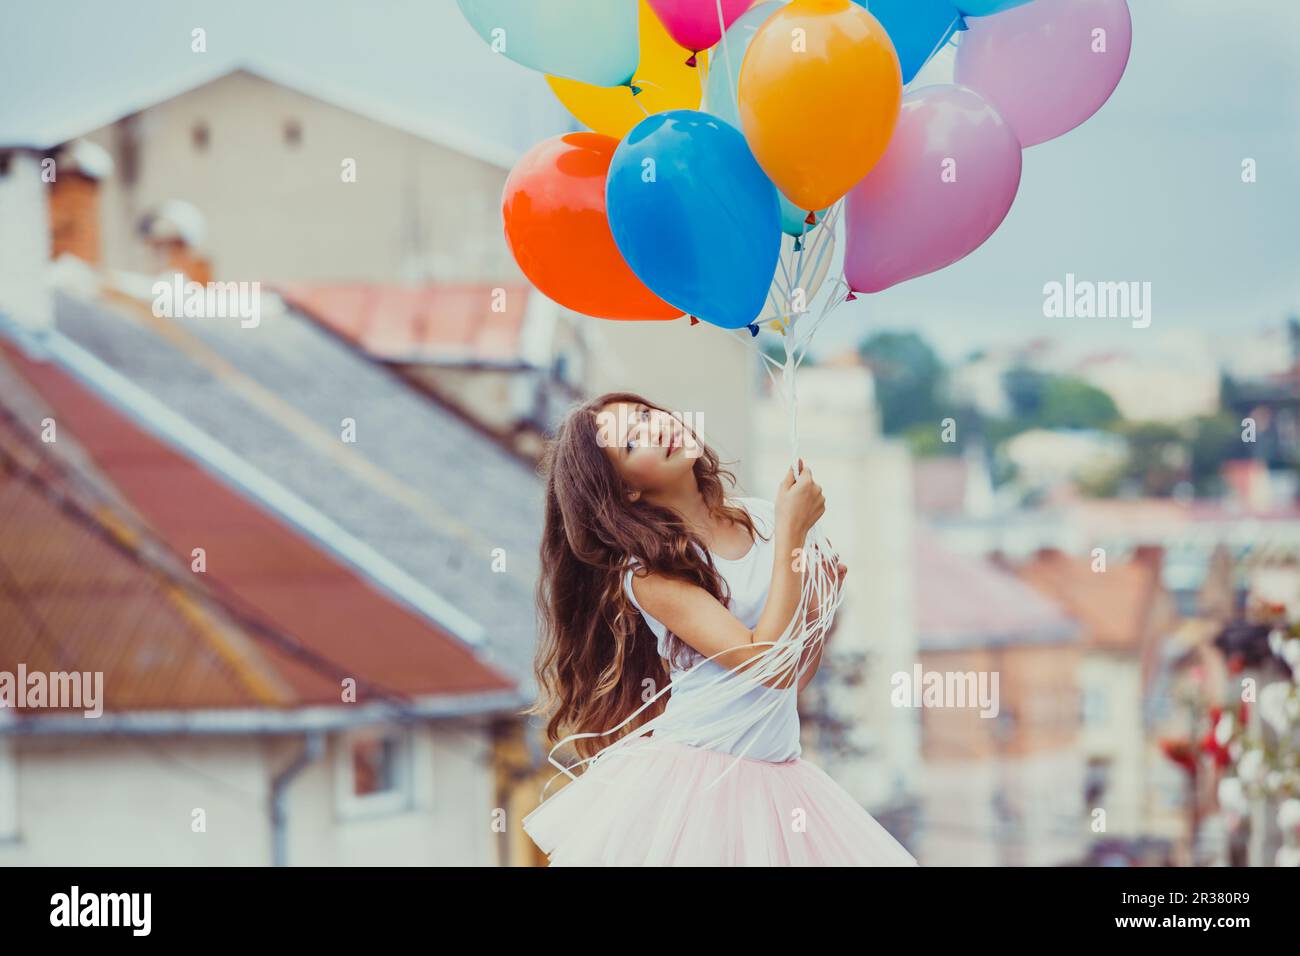 Girl with colorful latex balloons Stock Photo